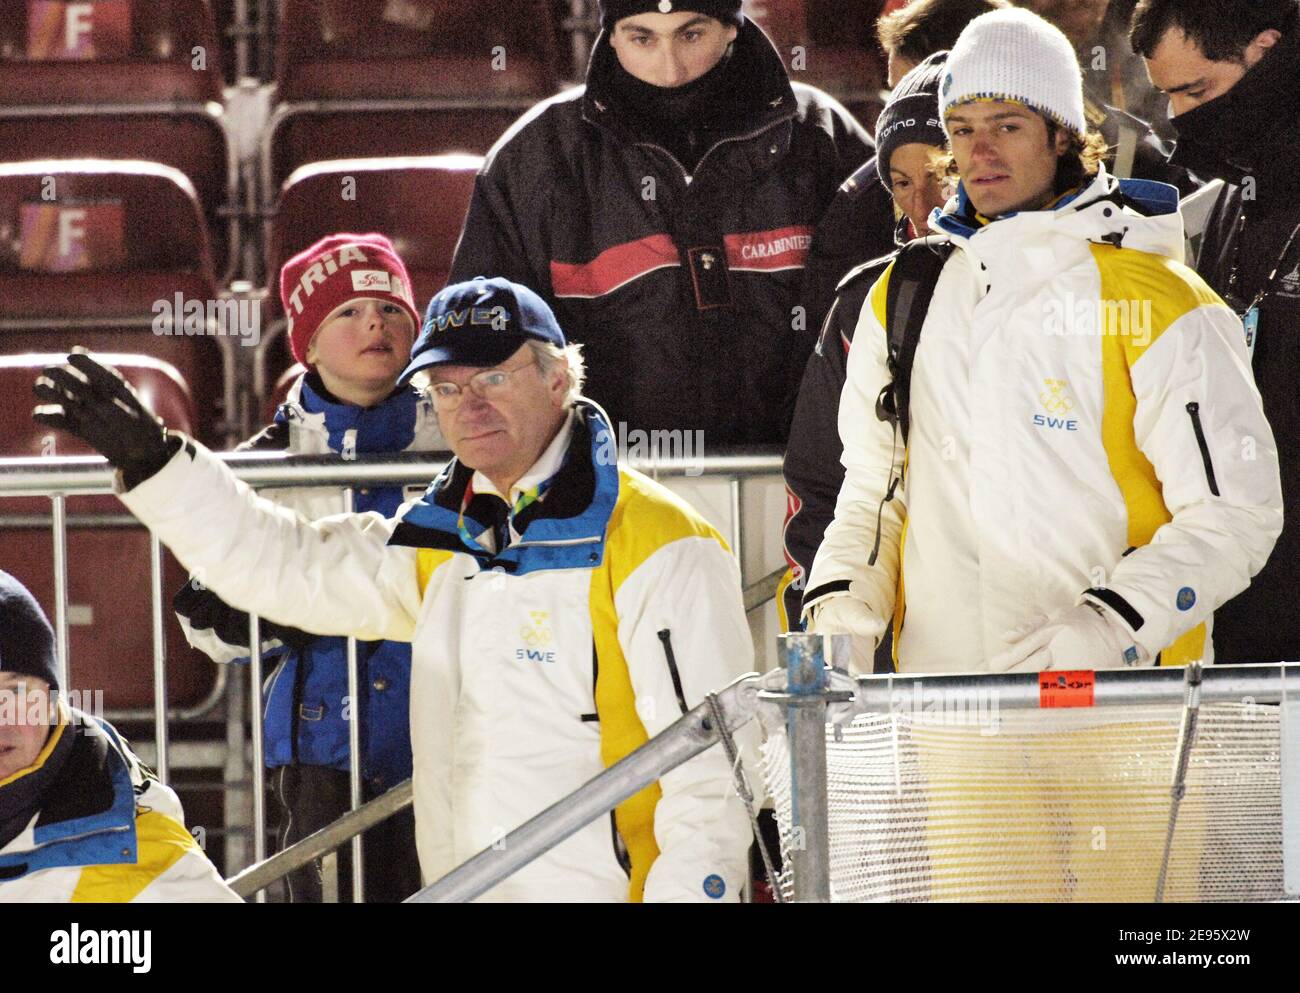 King Carl Gustav of Sweden and Prince Carl Philip attend the Alpine Skiing Men's Slalom at the Olympic Winter Games in Sestrieres, Italy, on February 25, 2006. Photo by Nicolas Gouhier/Cameleon/ABACAPRESS.COM Stock Photo